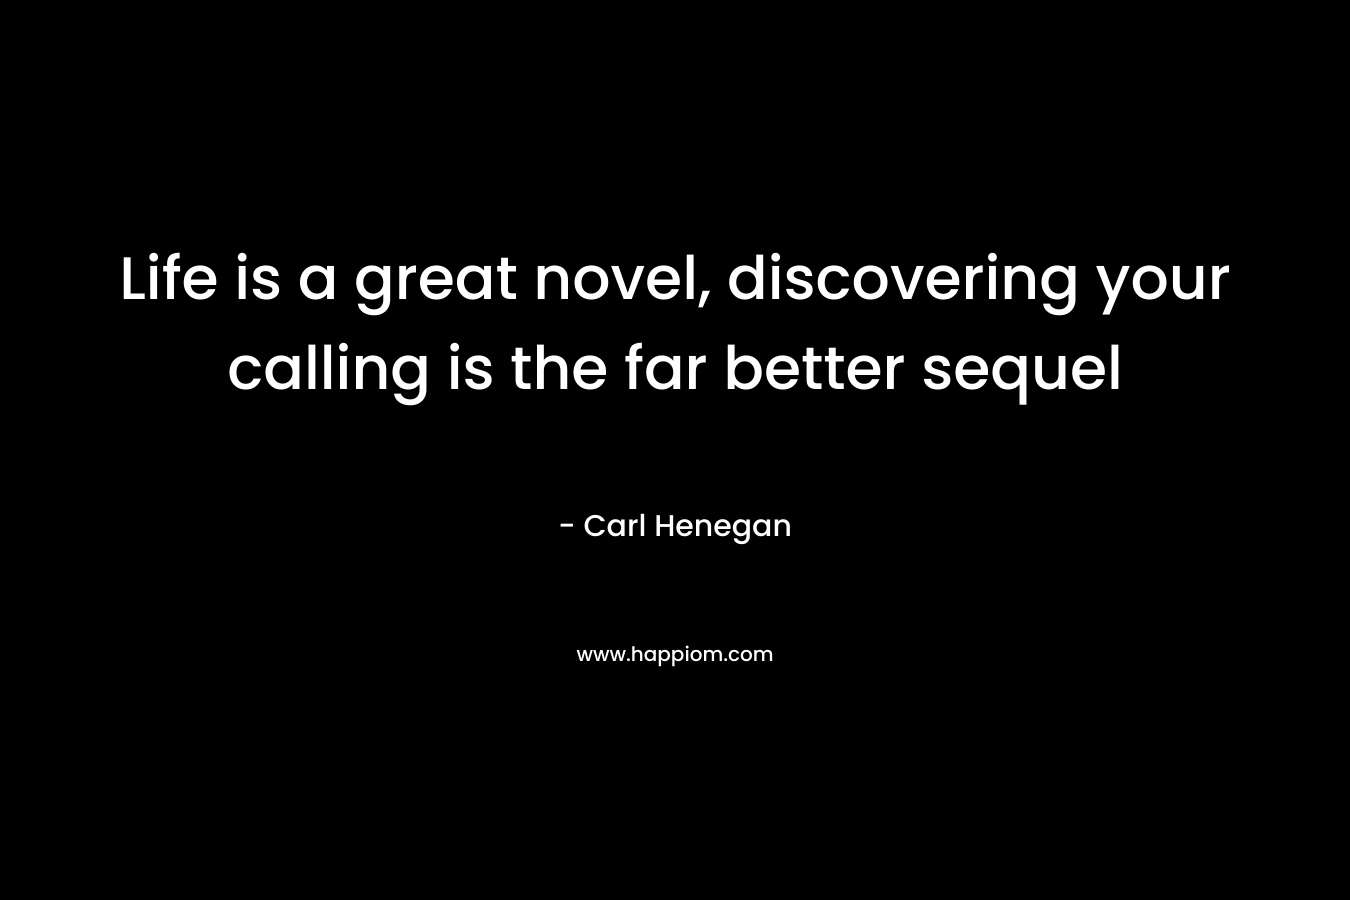 Life is a great novel, discovering your calling is the far better sequel – Carl Henegan